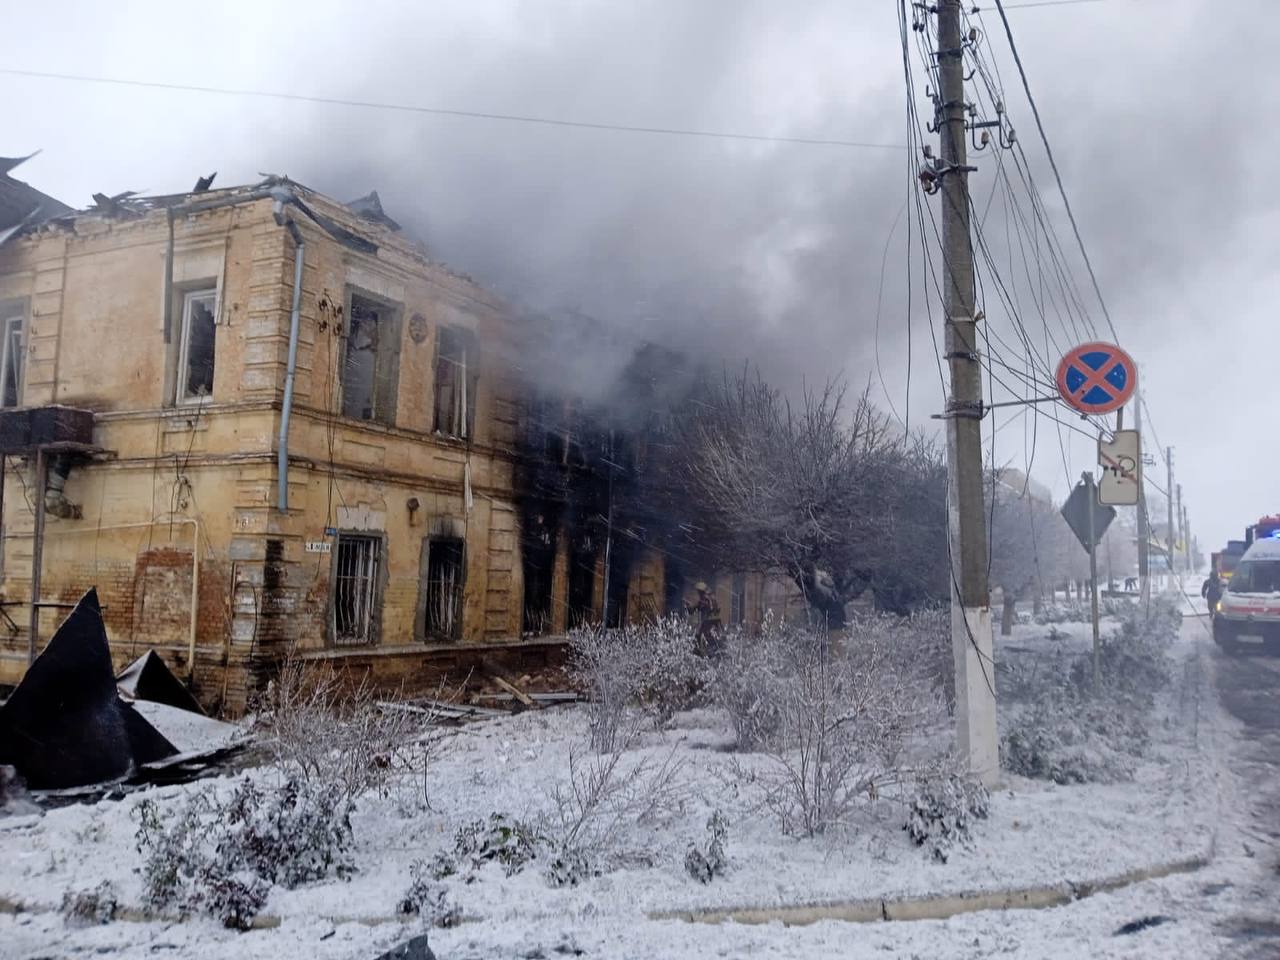 Russia shelled hospital and residential building in the Kharkiv region, killing 2 civilians